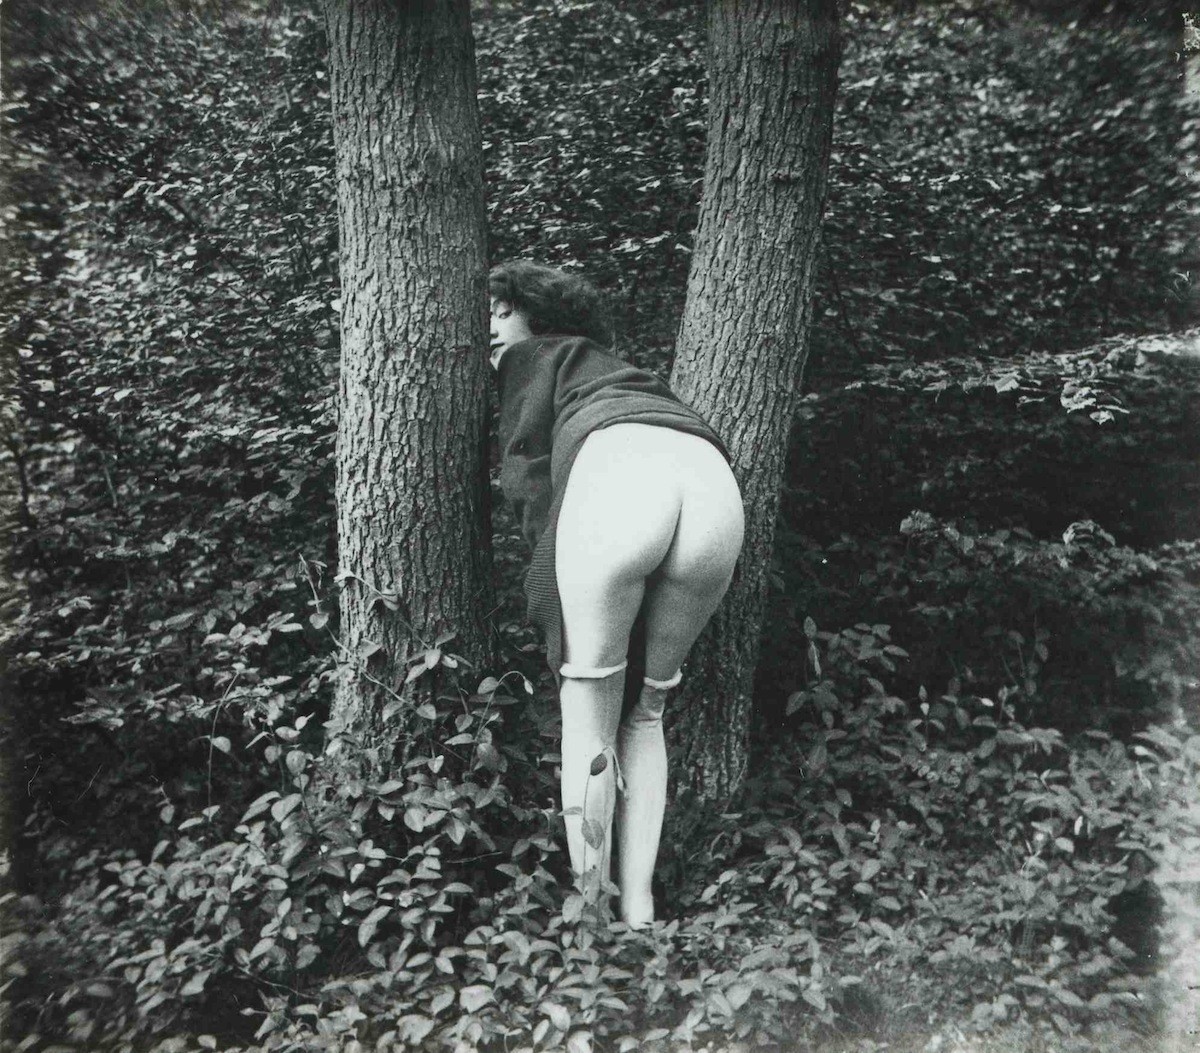 1930s Pornography - Charming Pornographic Photographs of French Prostitutes from the 1930s